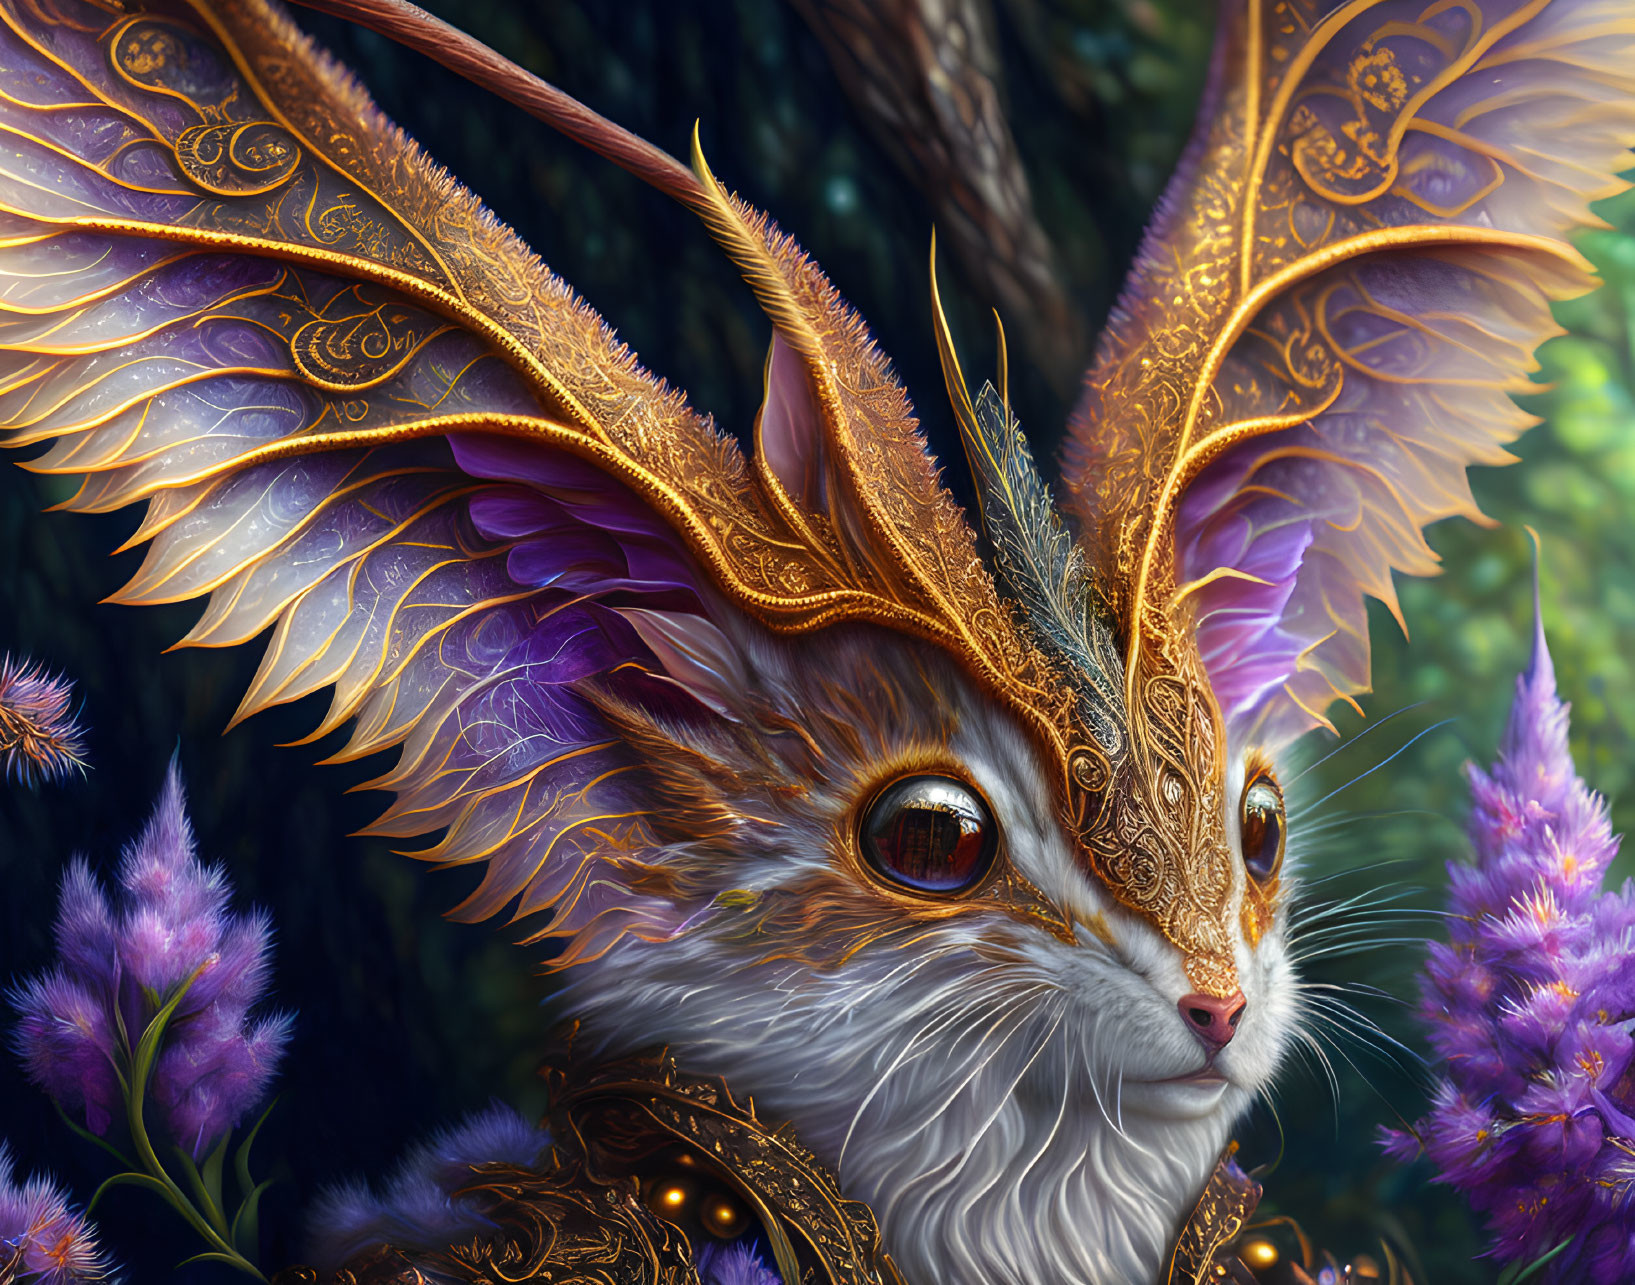 Cat-headed creature with golden and purple wings on floral backdrop